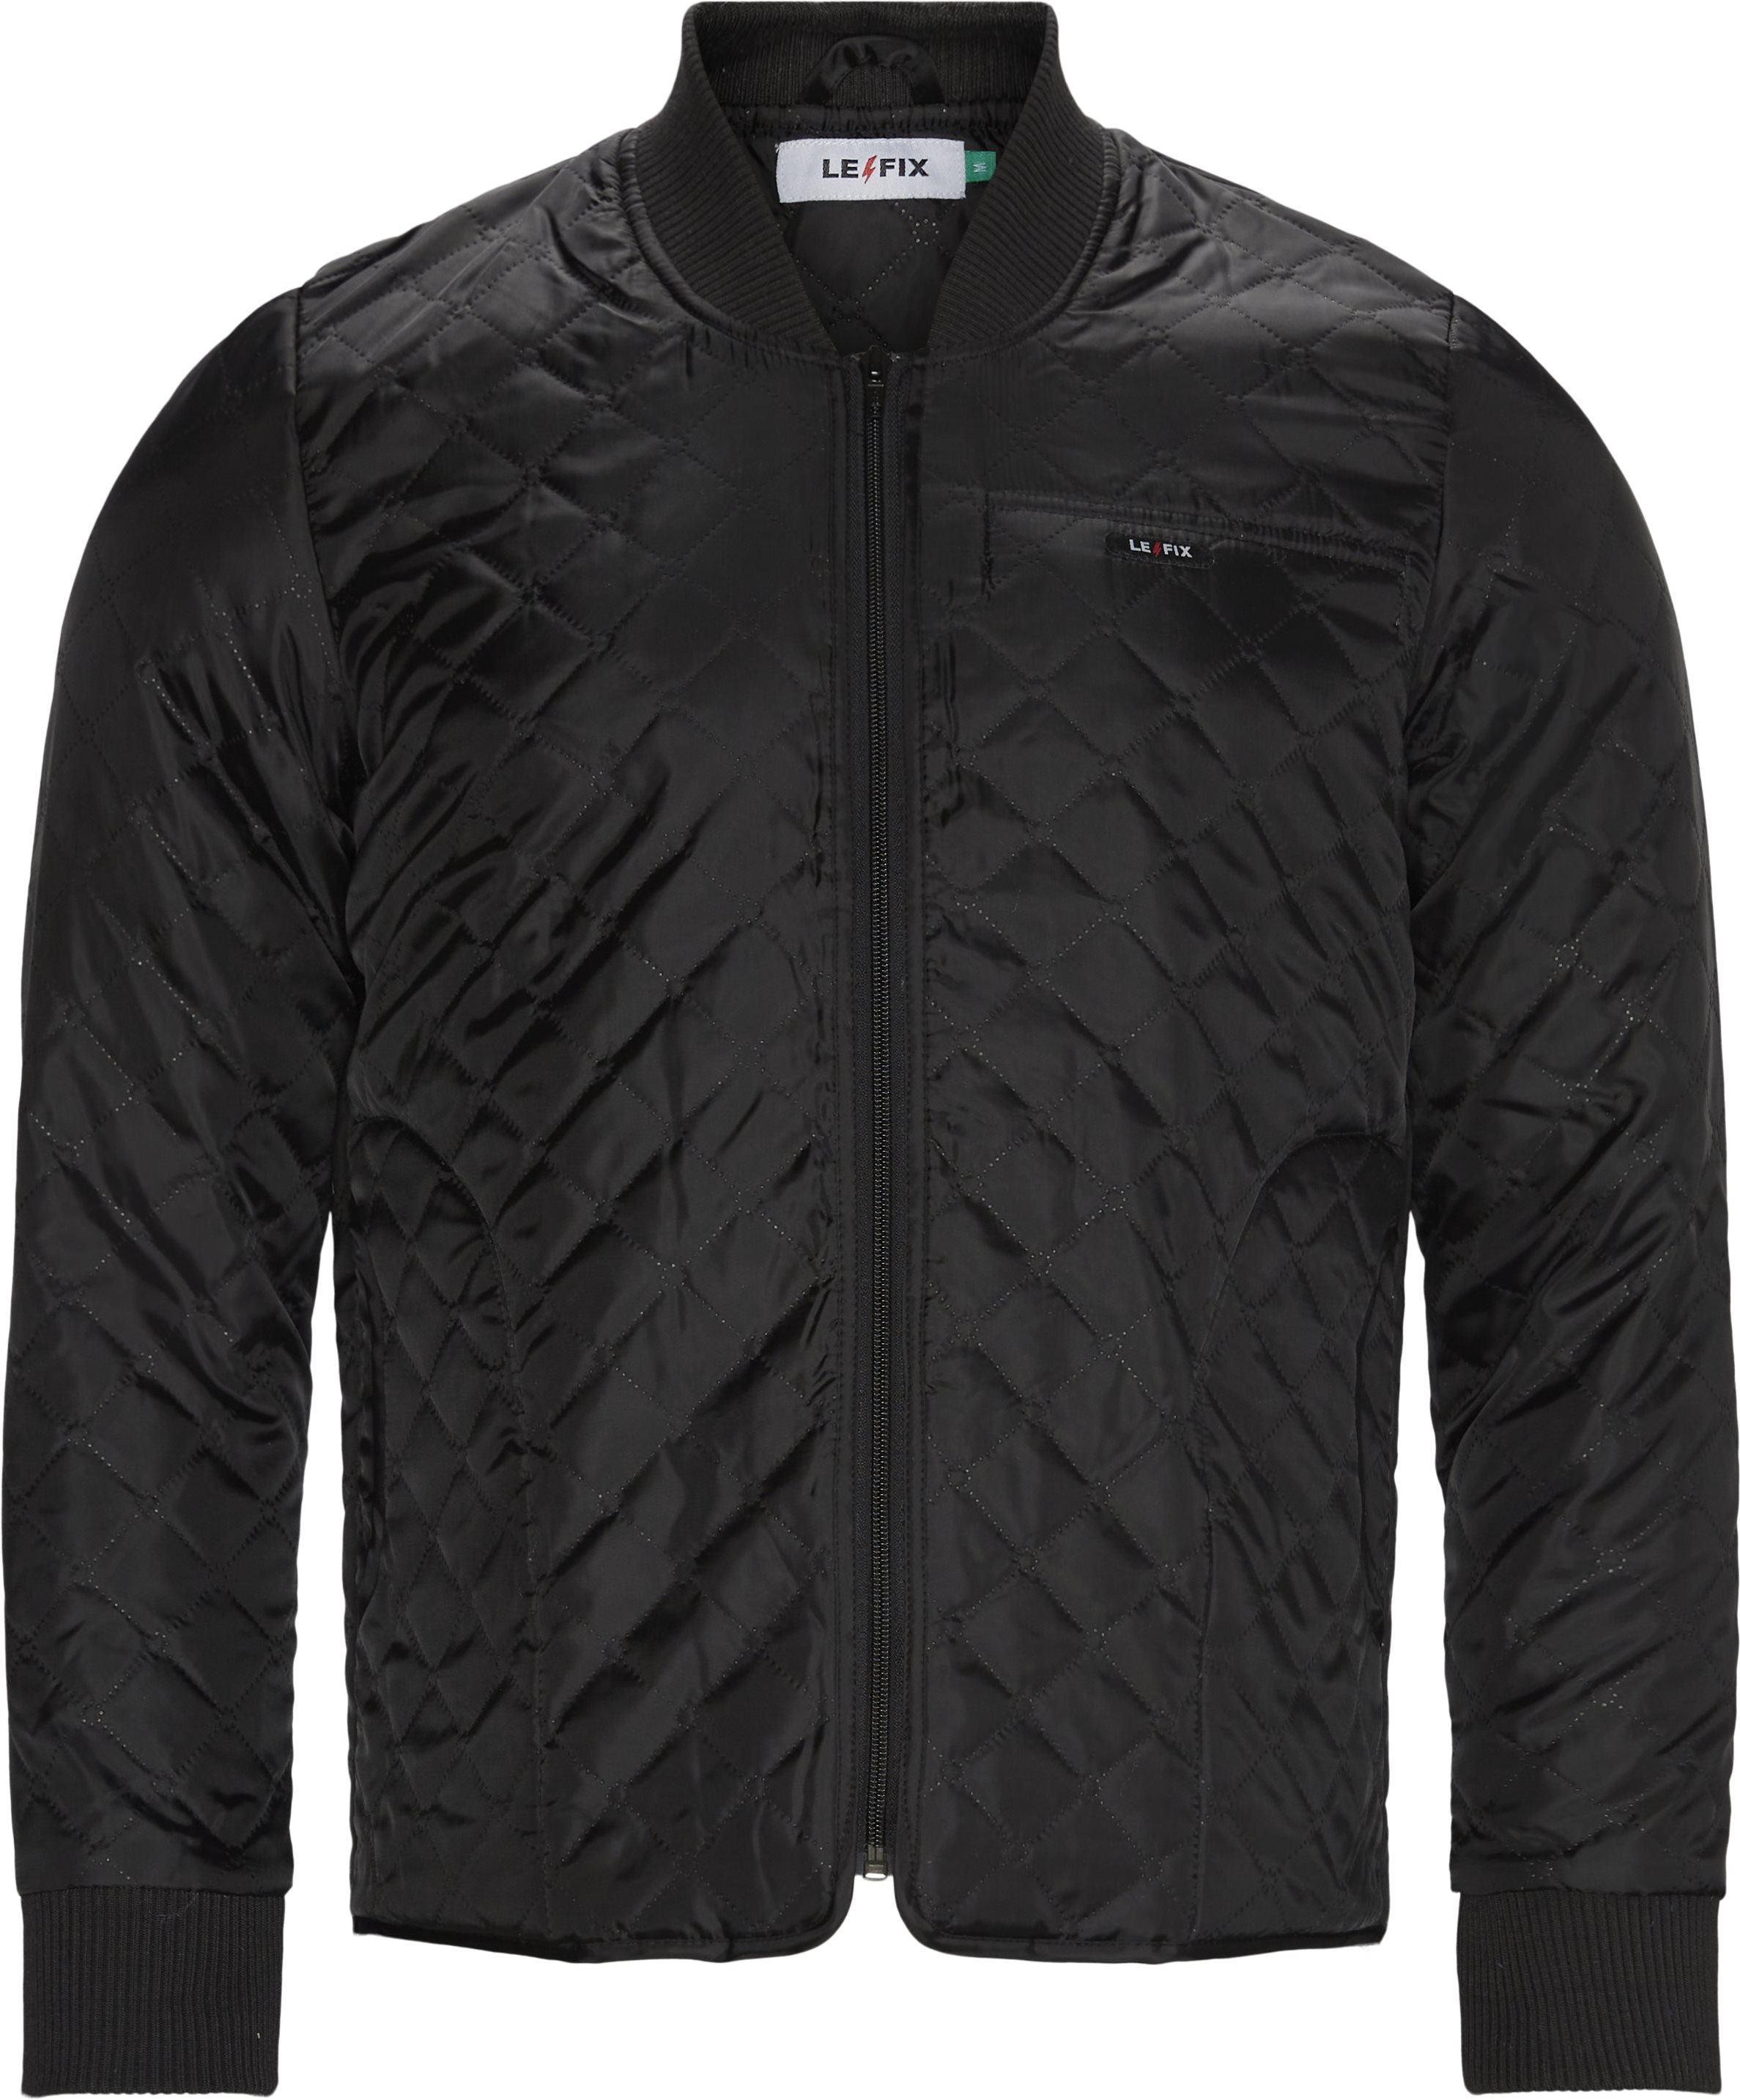 THERMO JACKET Jackets SORT from Le Fix 40 EUR